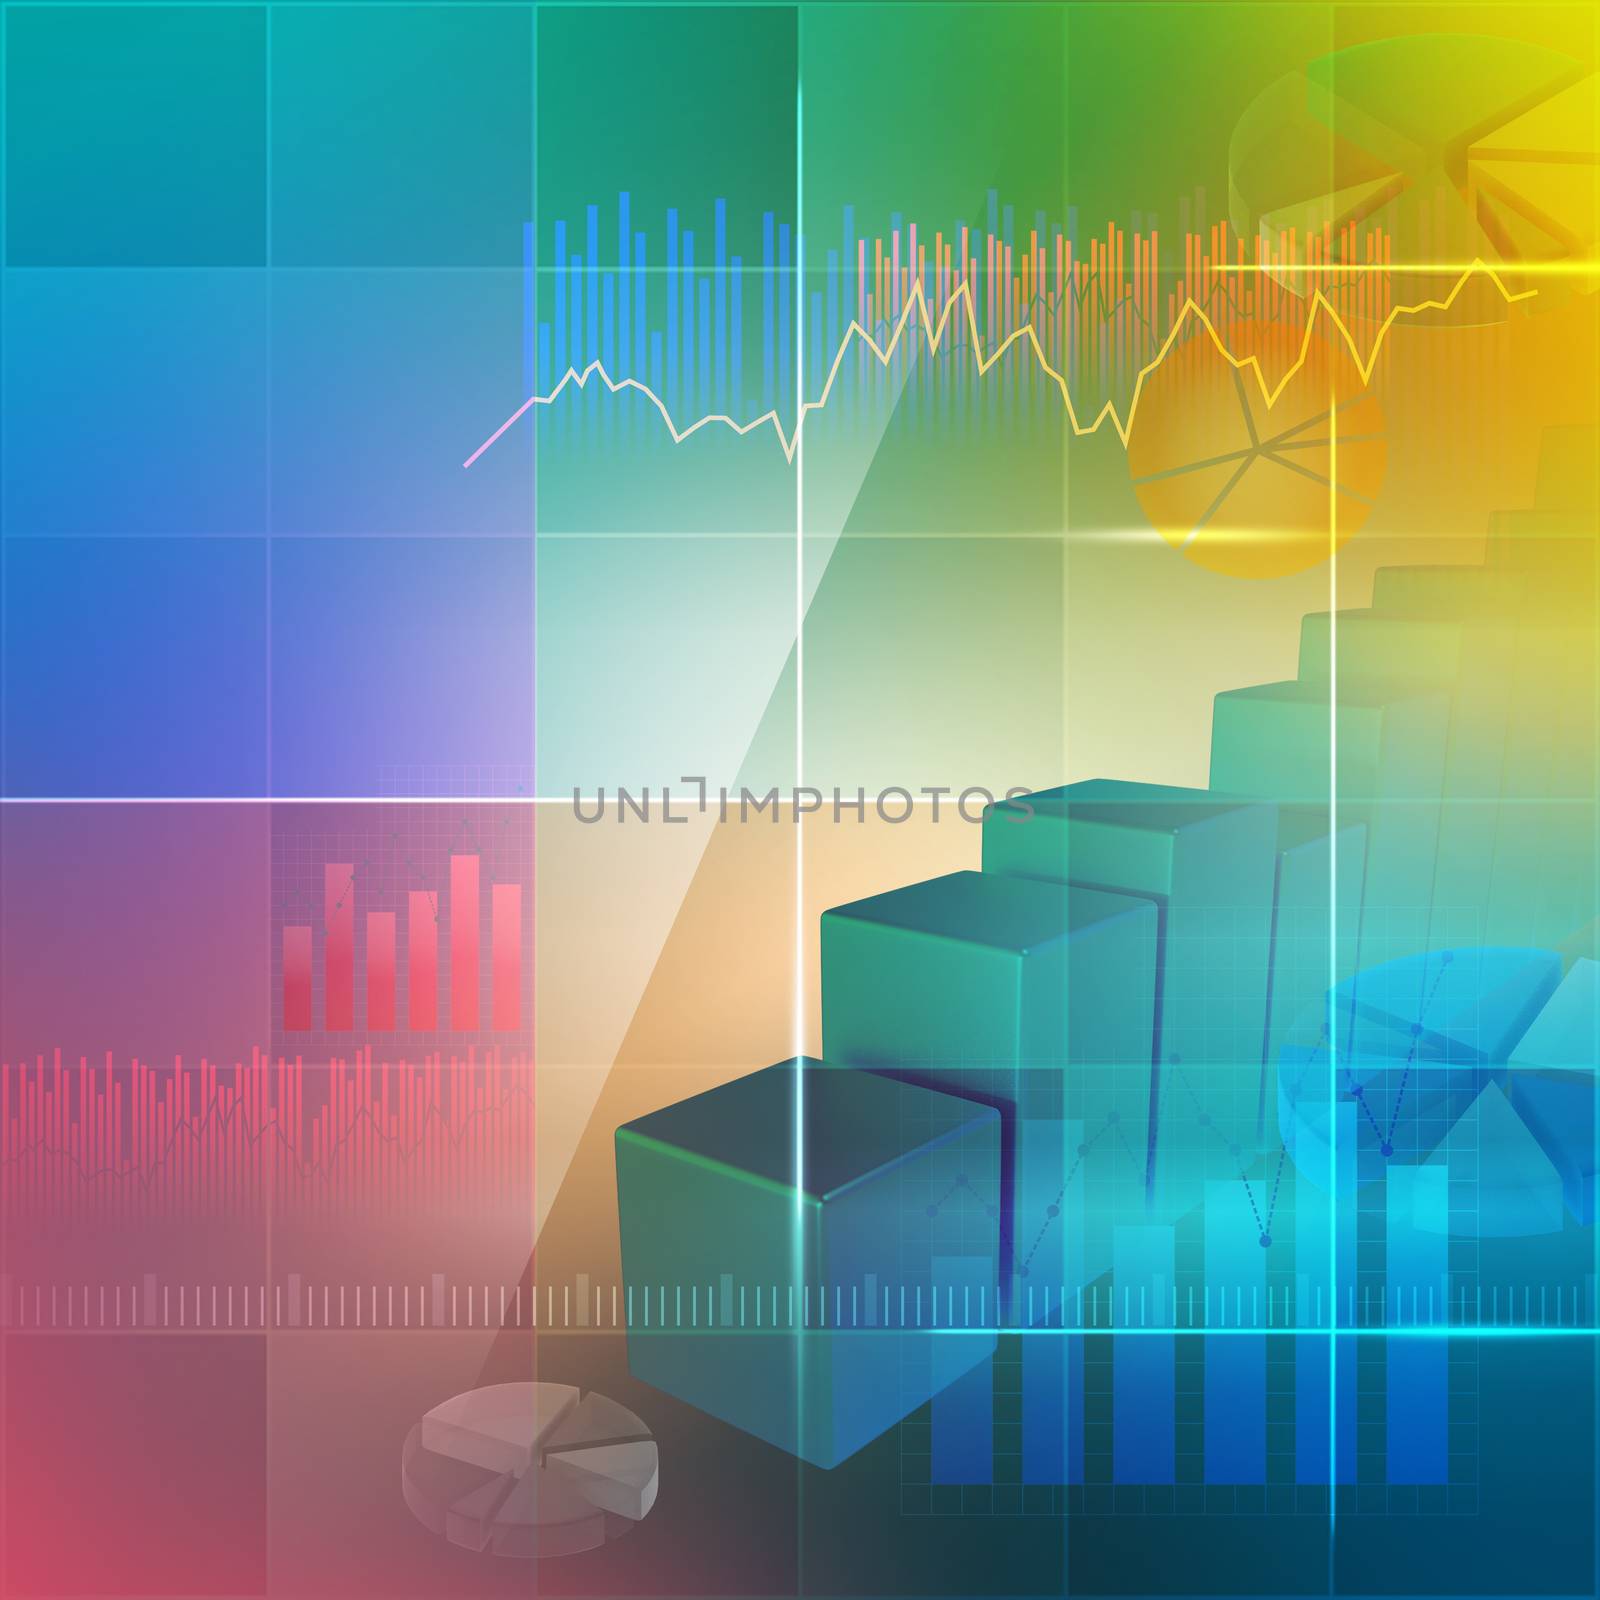 Colorful background for illustrating business